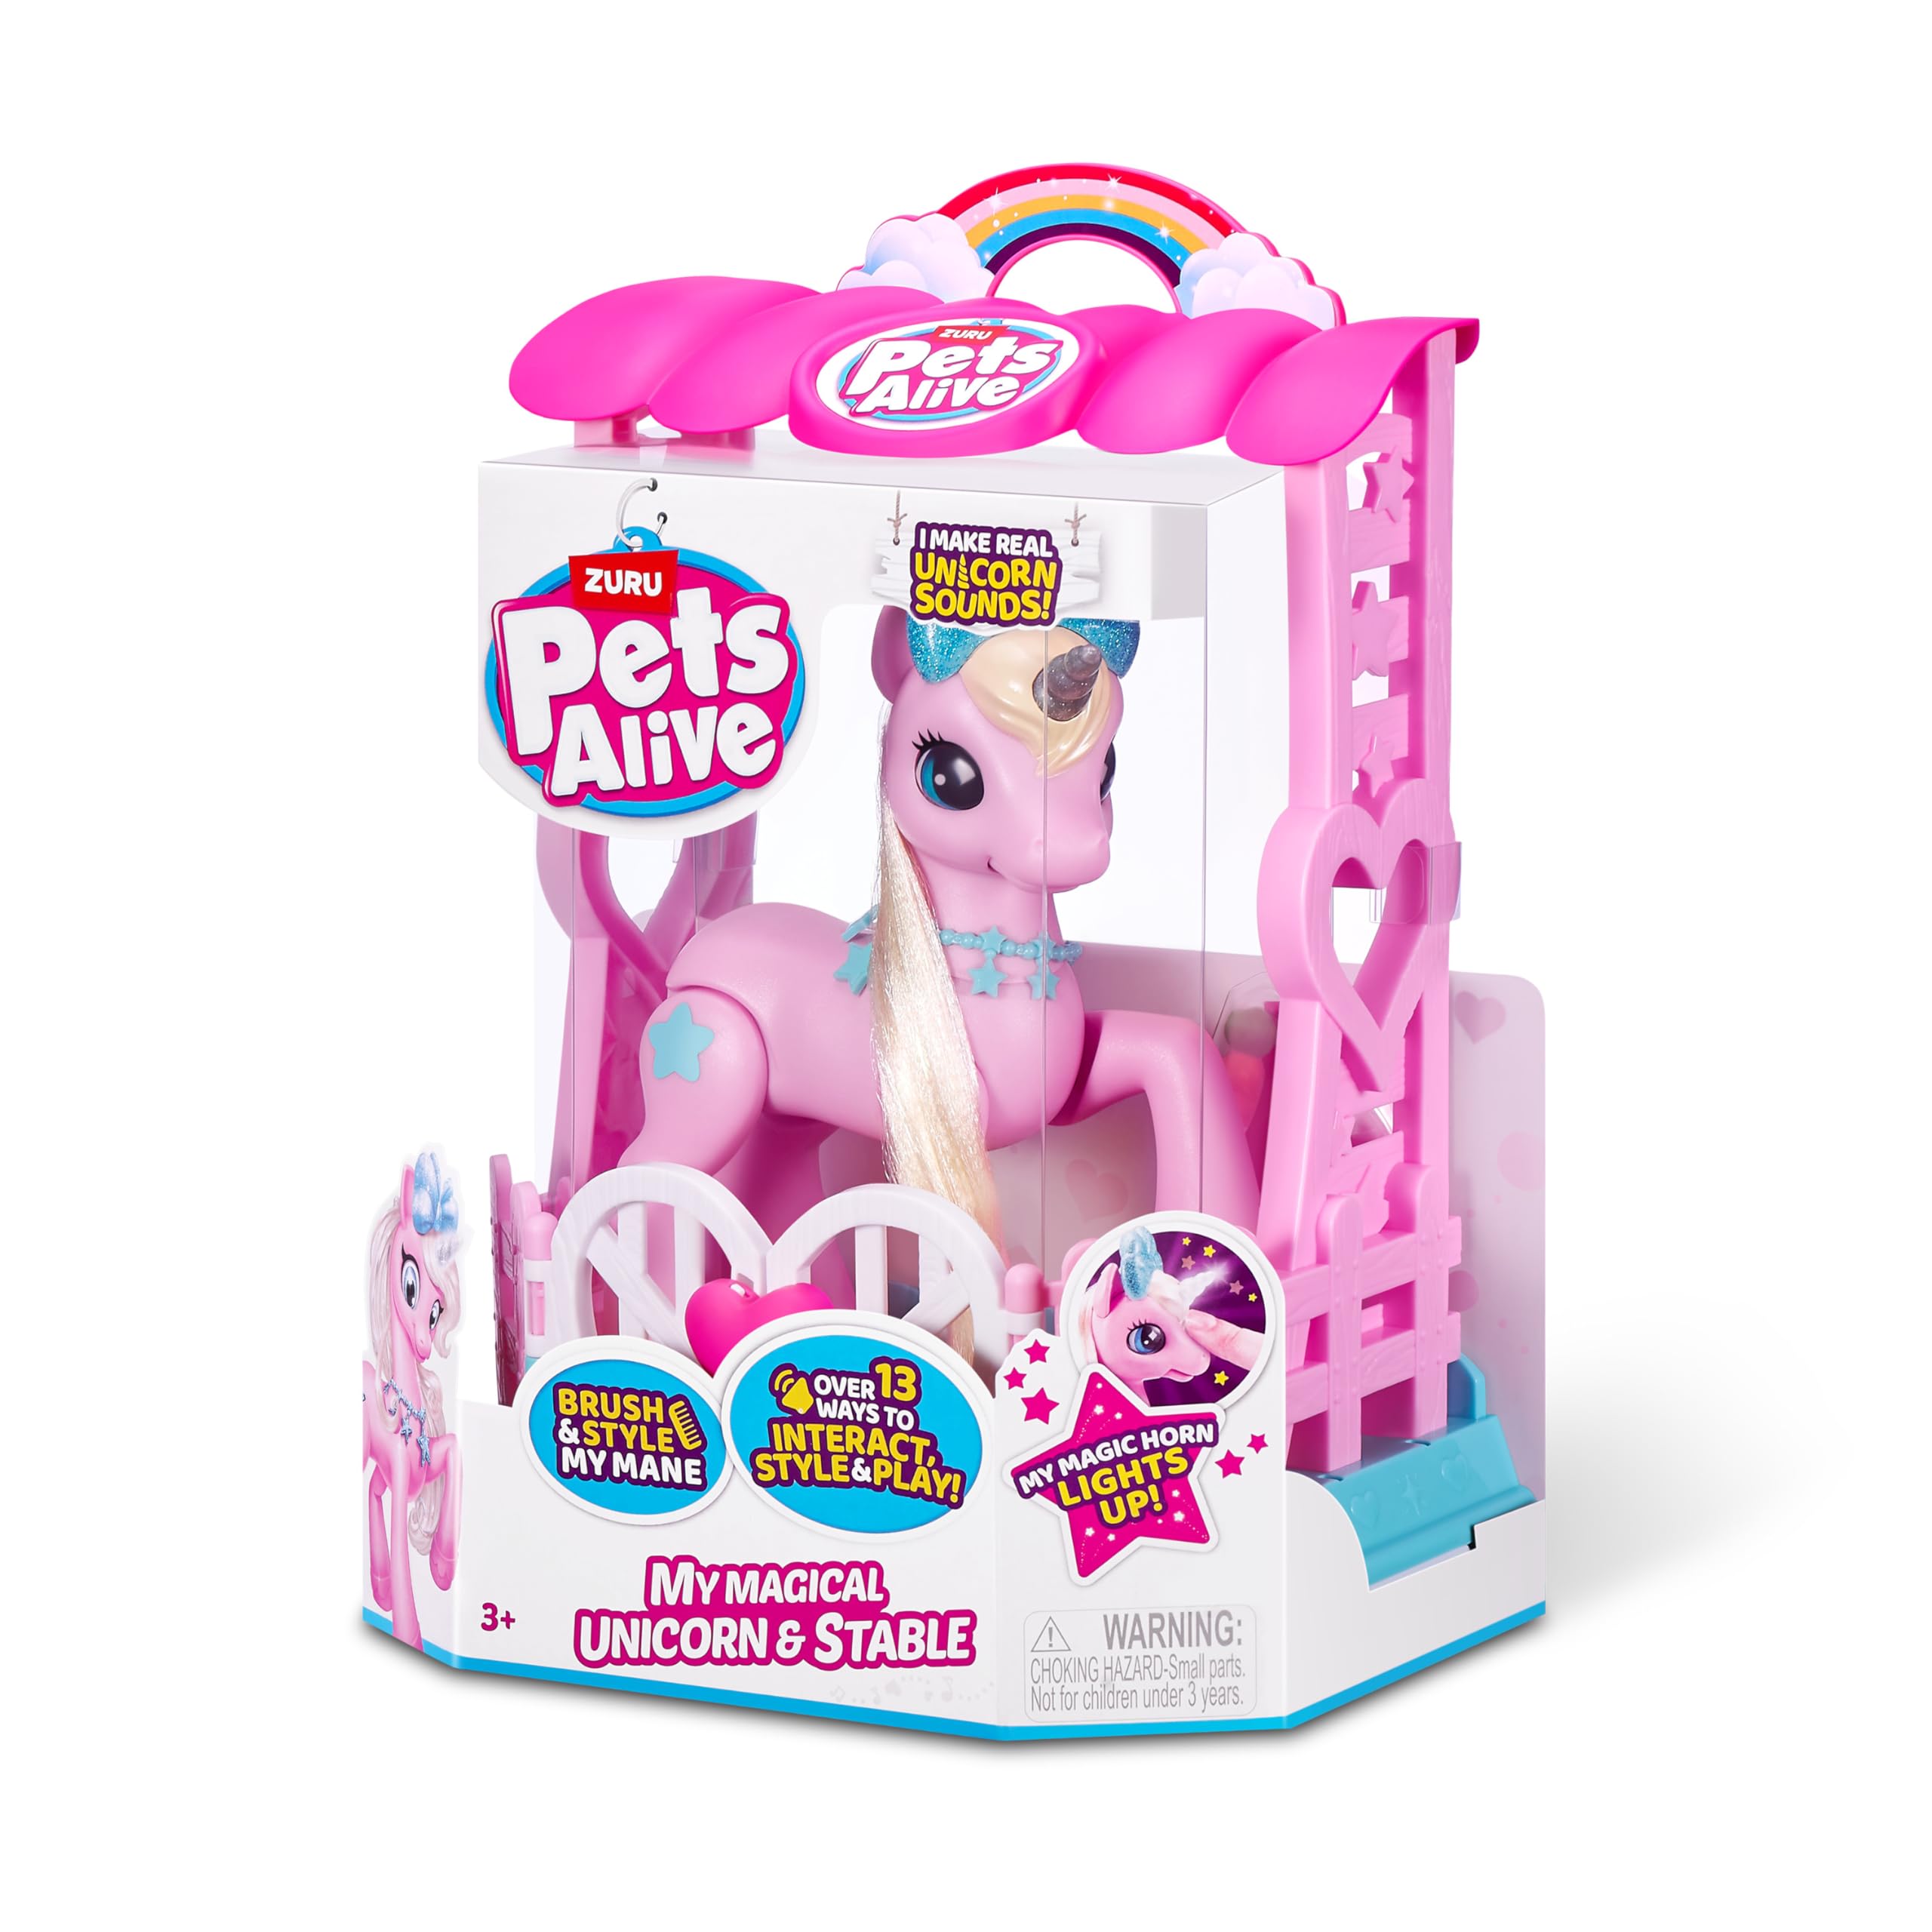 Pets Alive My Magical Unicorn and Stable Battery Powered Interactive Robotic Toy Playset by ZURU